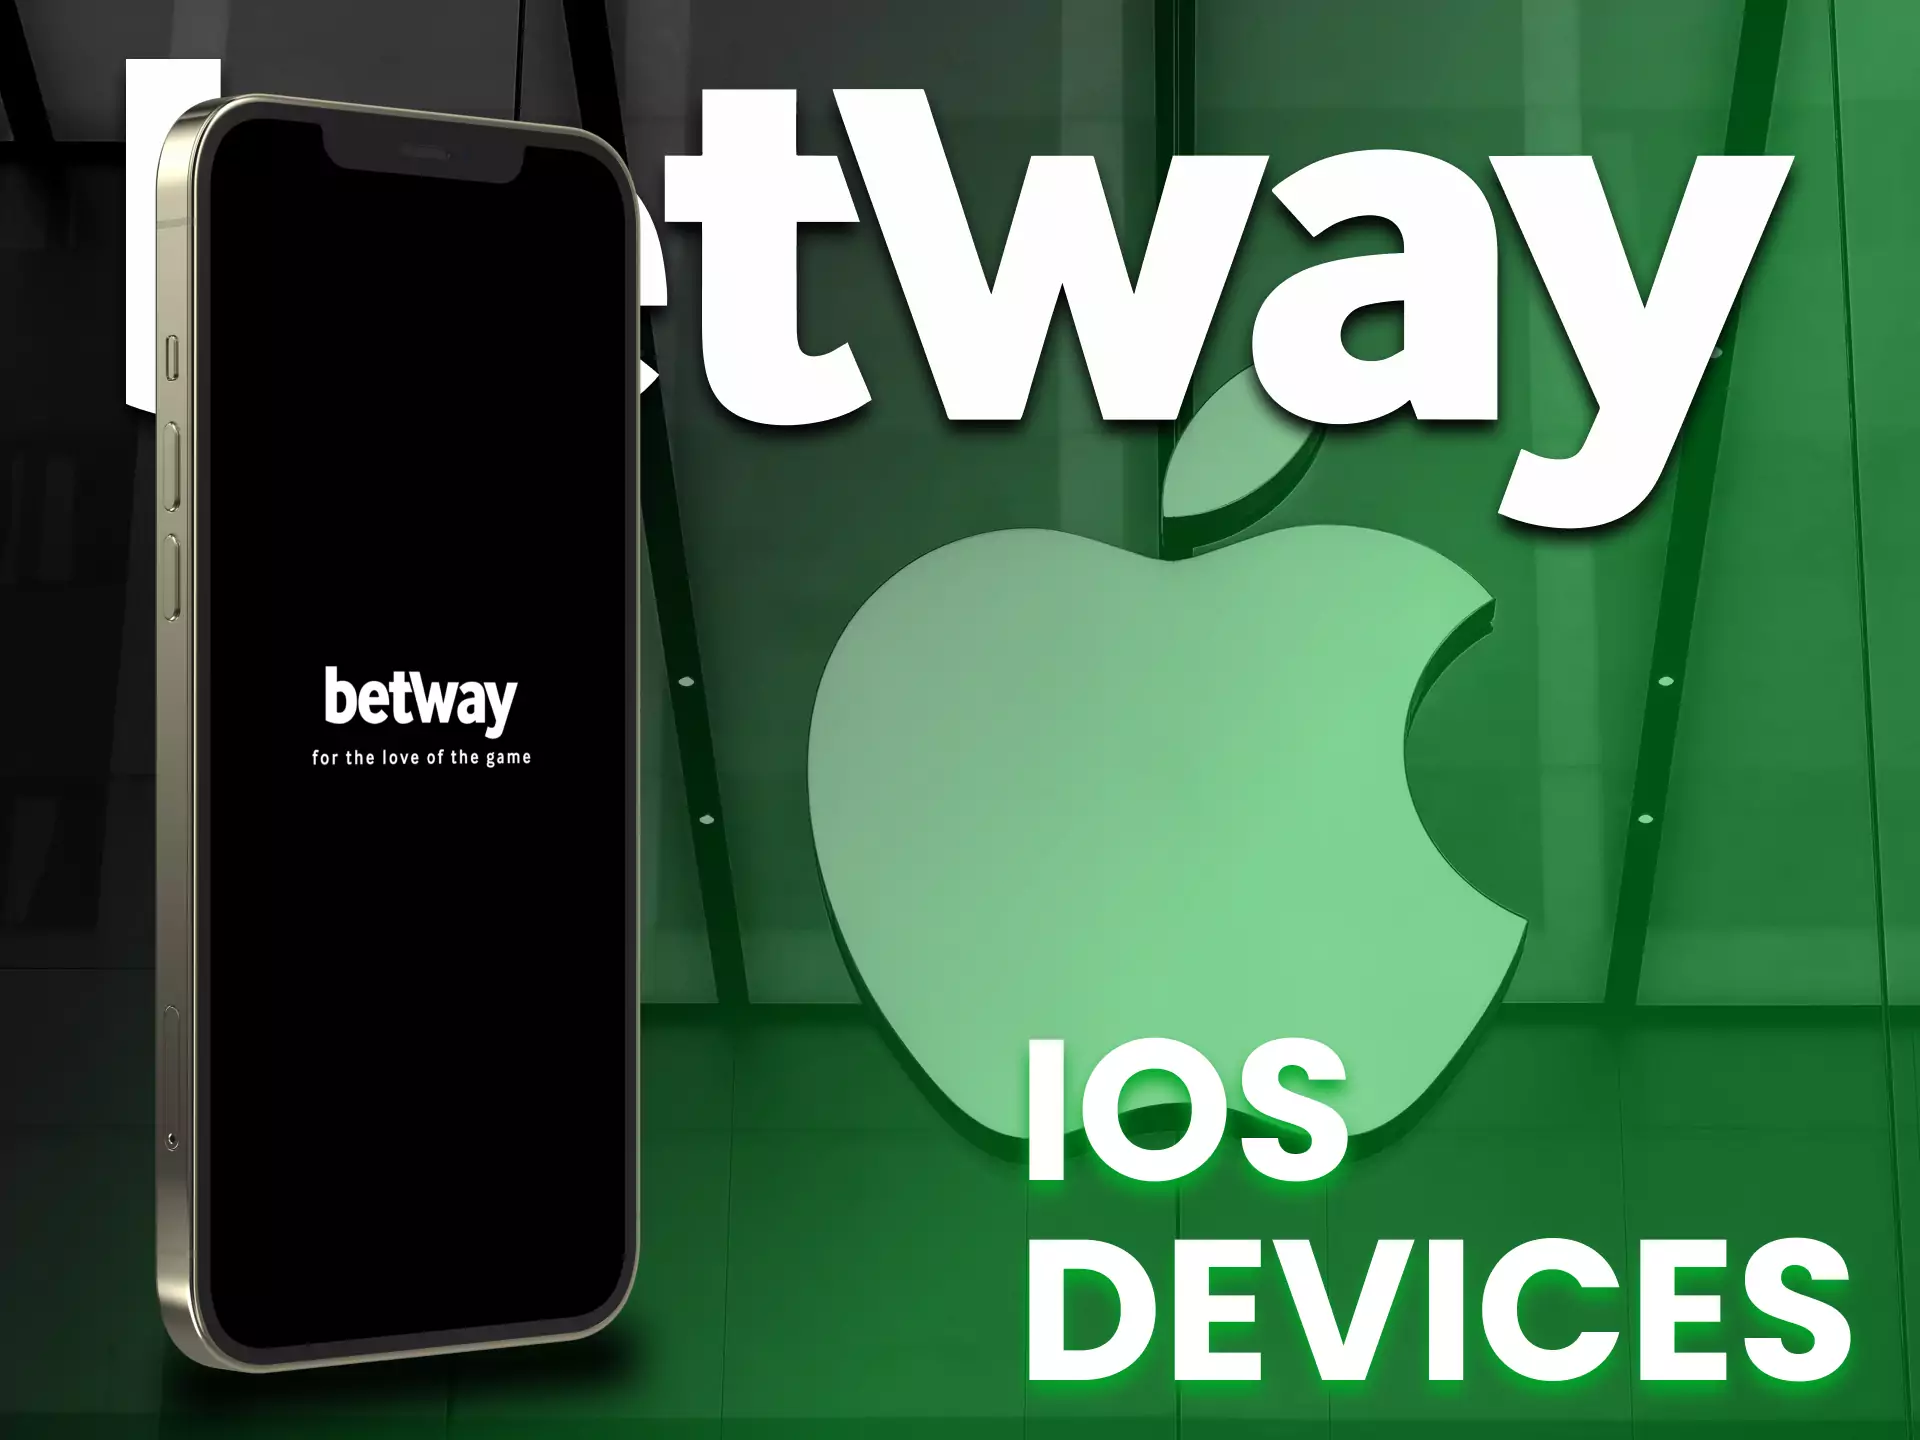 The Betway app is supported on various iOS devices.